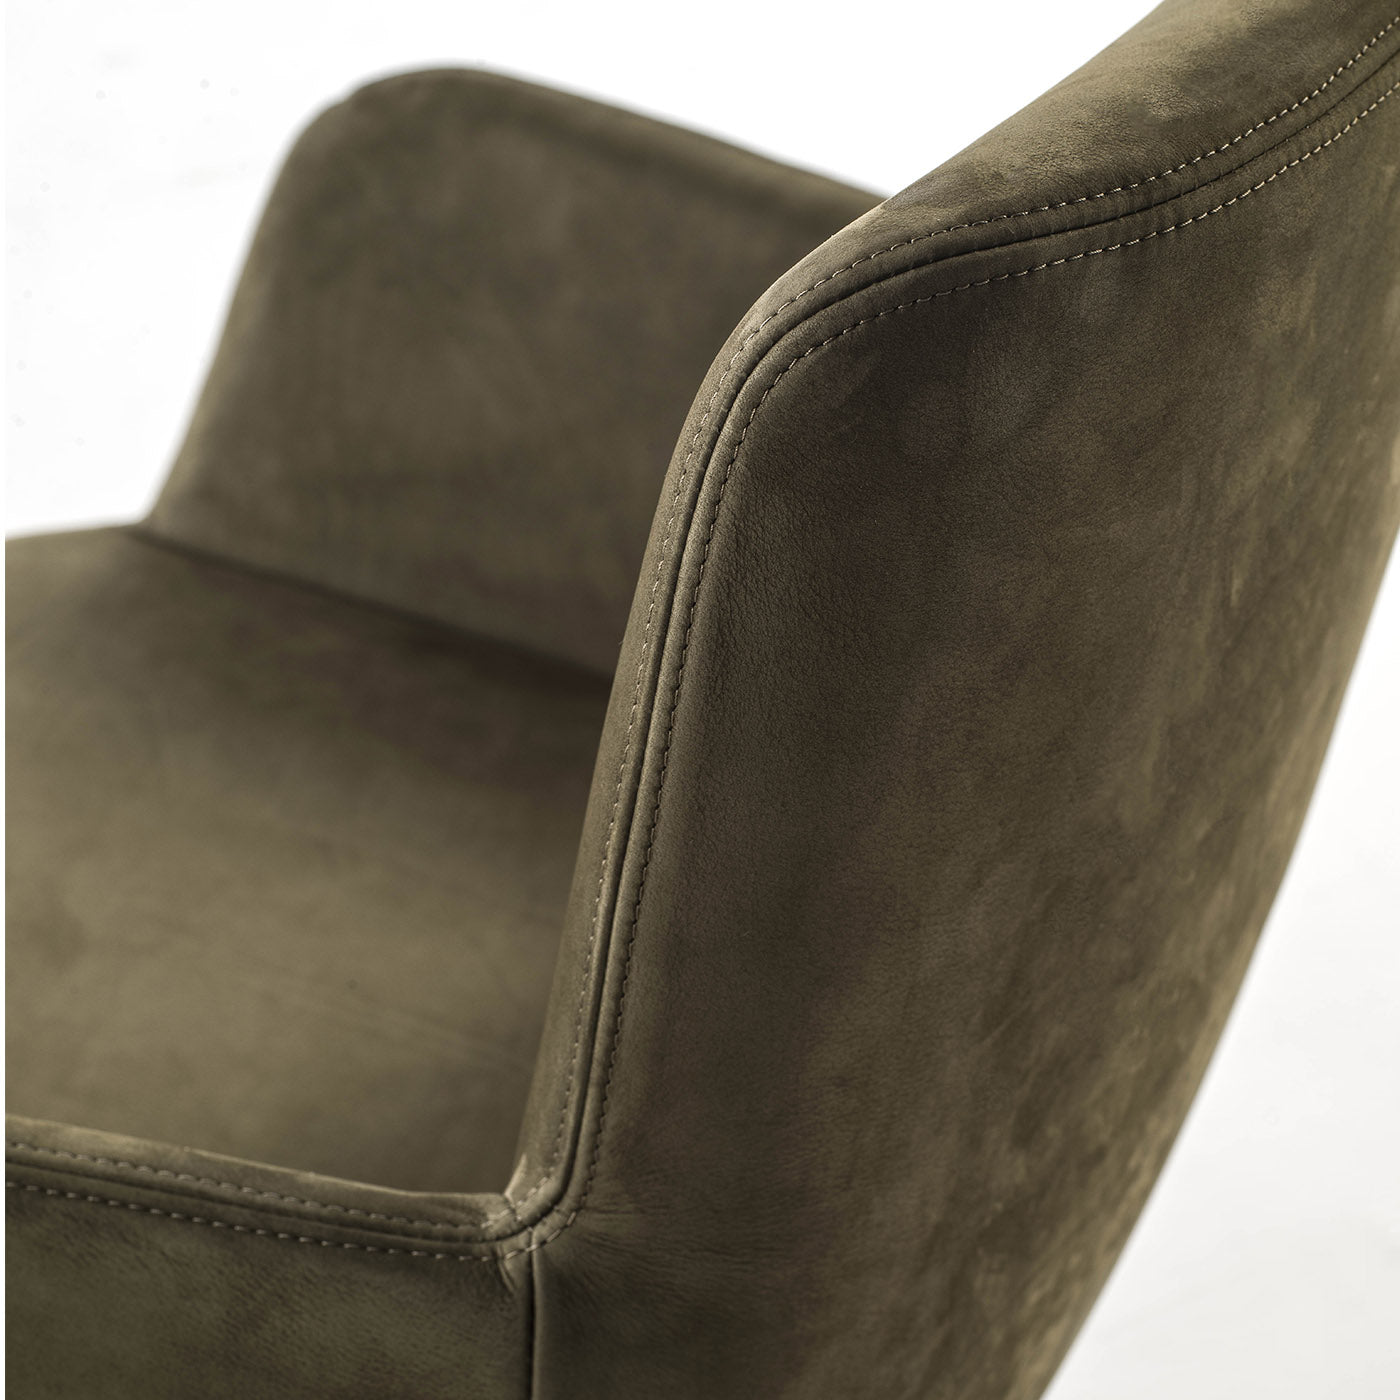 Materia Soft Swivel Sage-Green Chair With Armrests by Claudio Bellini - Alternative view 2